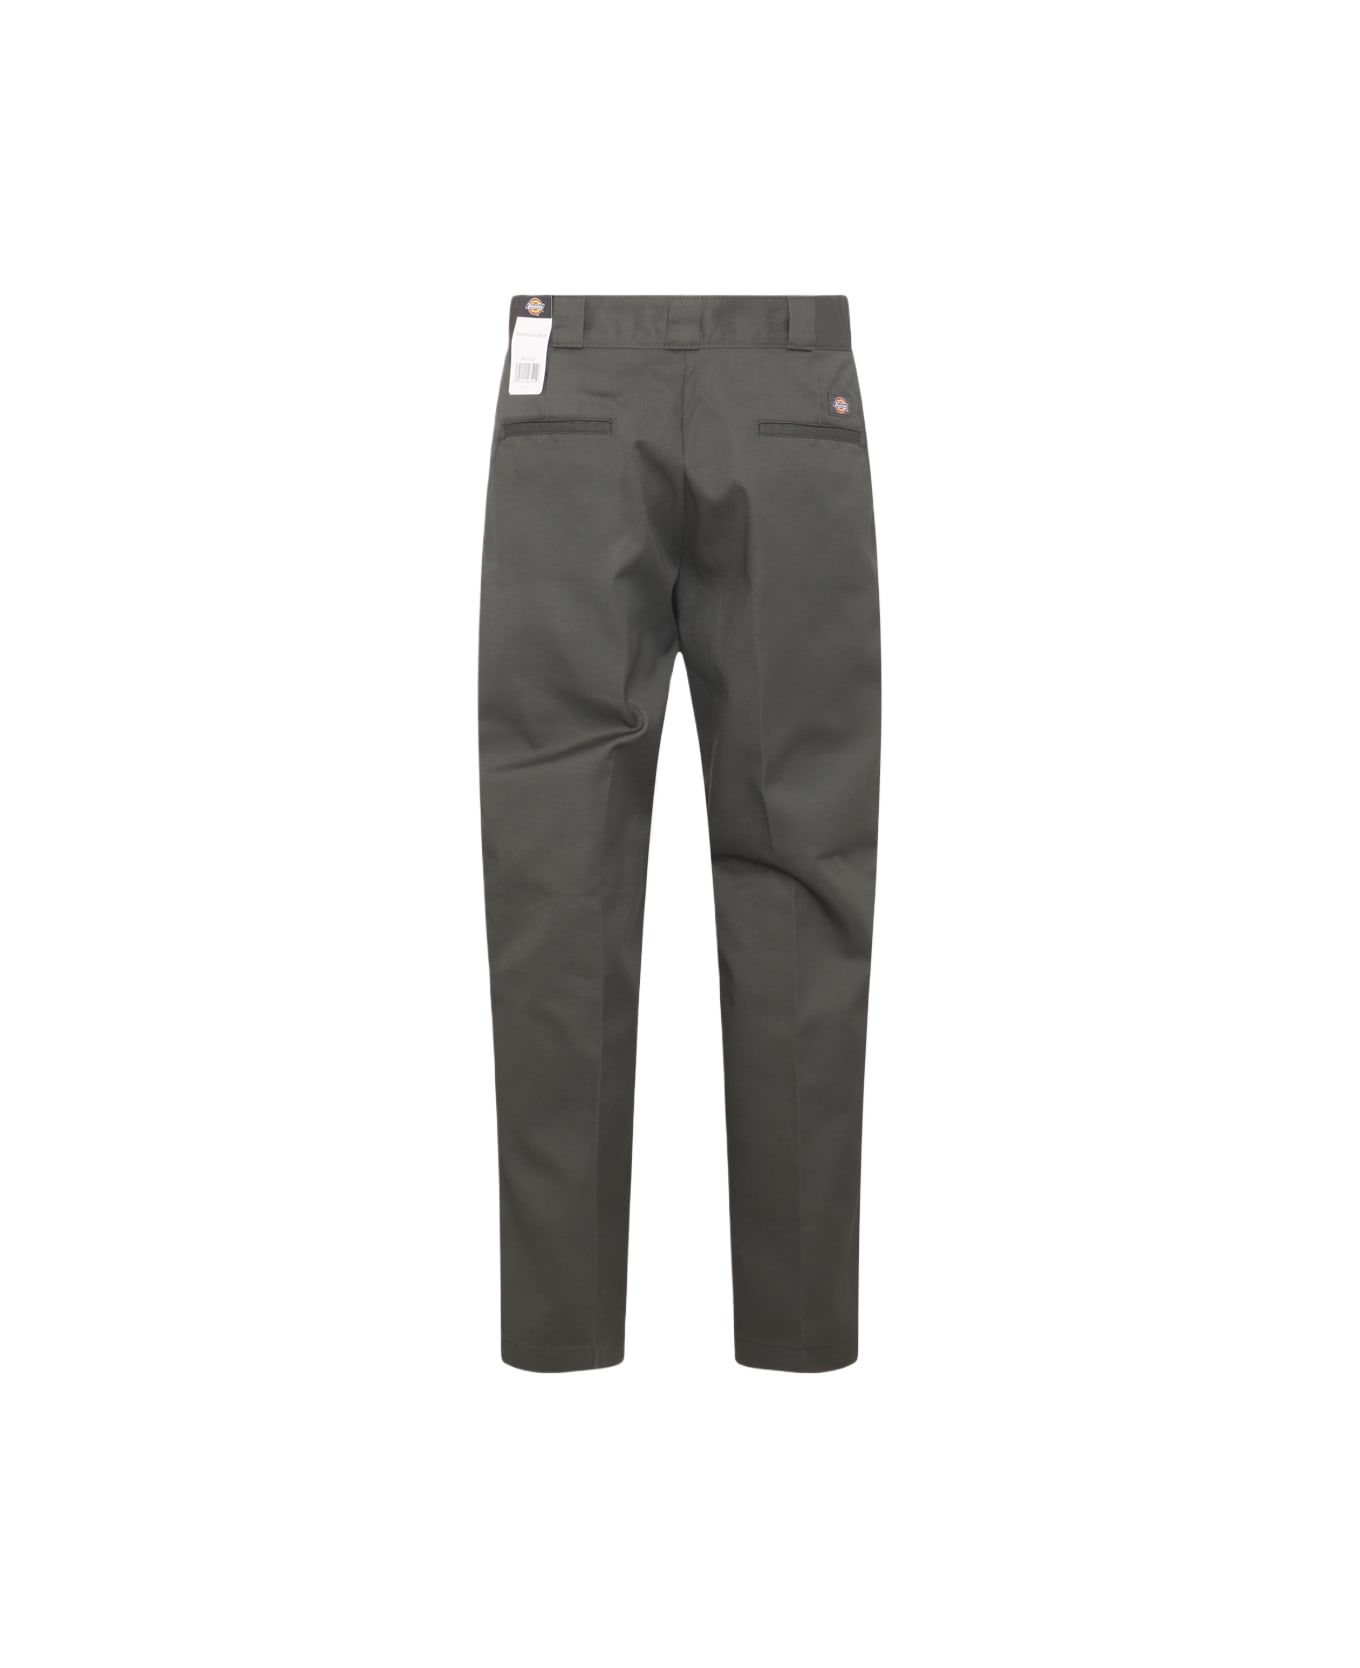 Dickies Olive Cotton Blend Pants